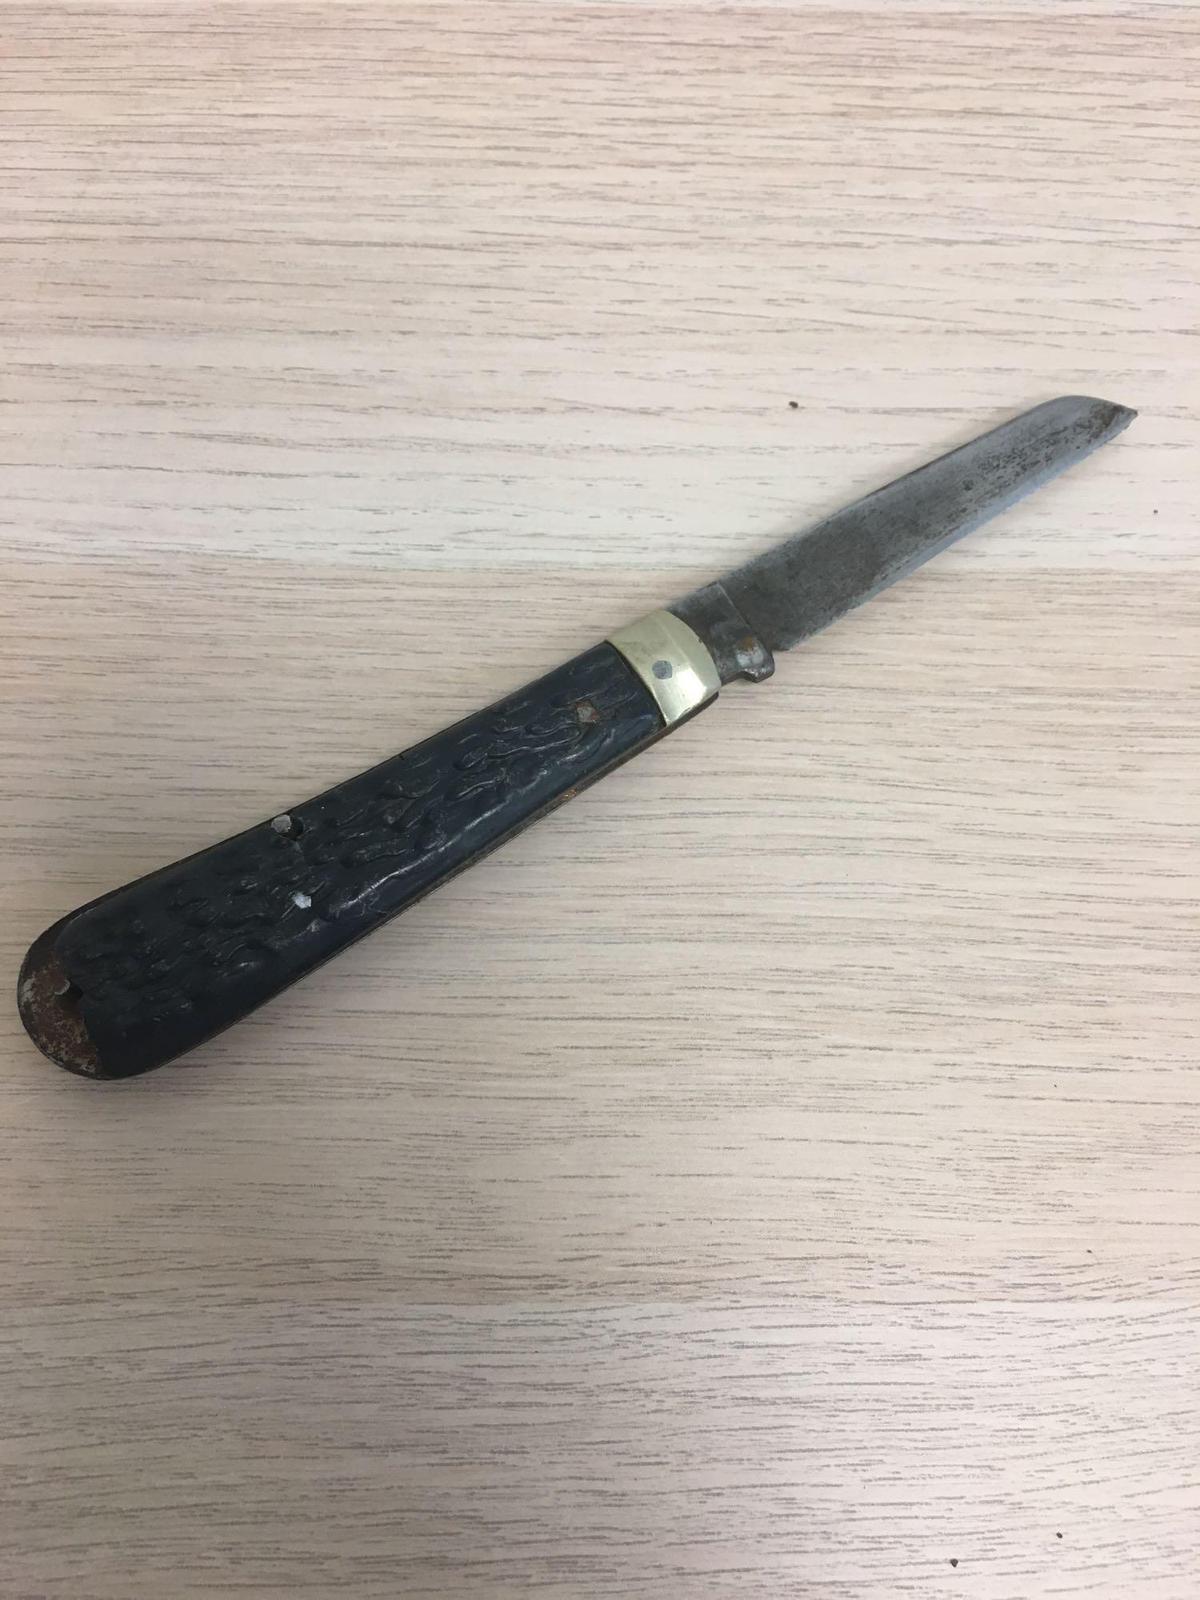 Amazing Vintage Pocket Knife Made in the USA